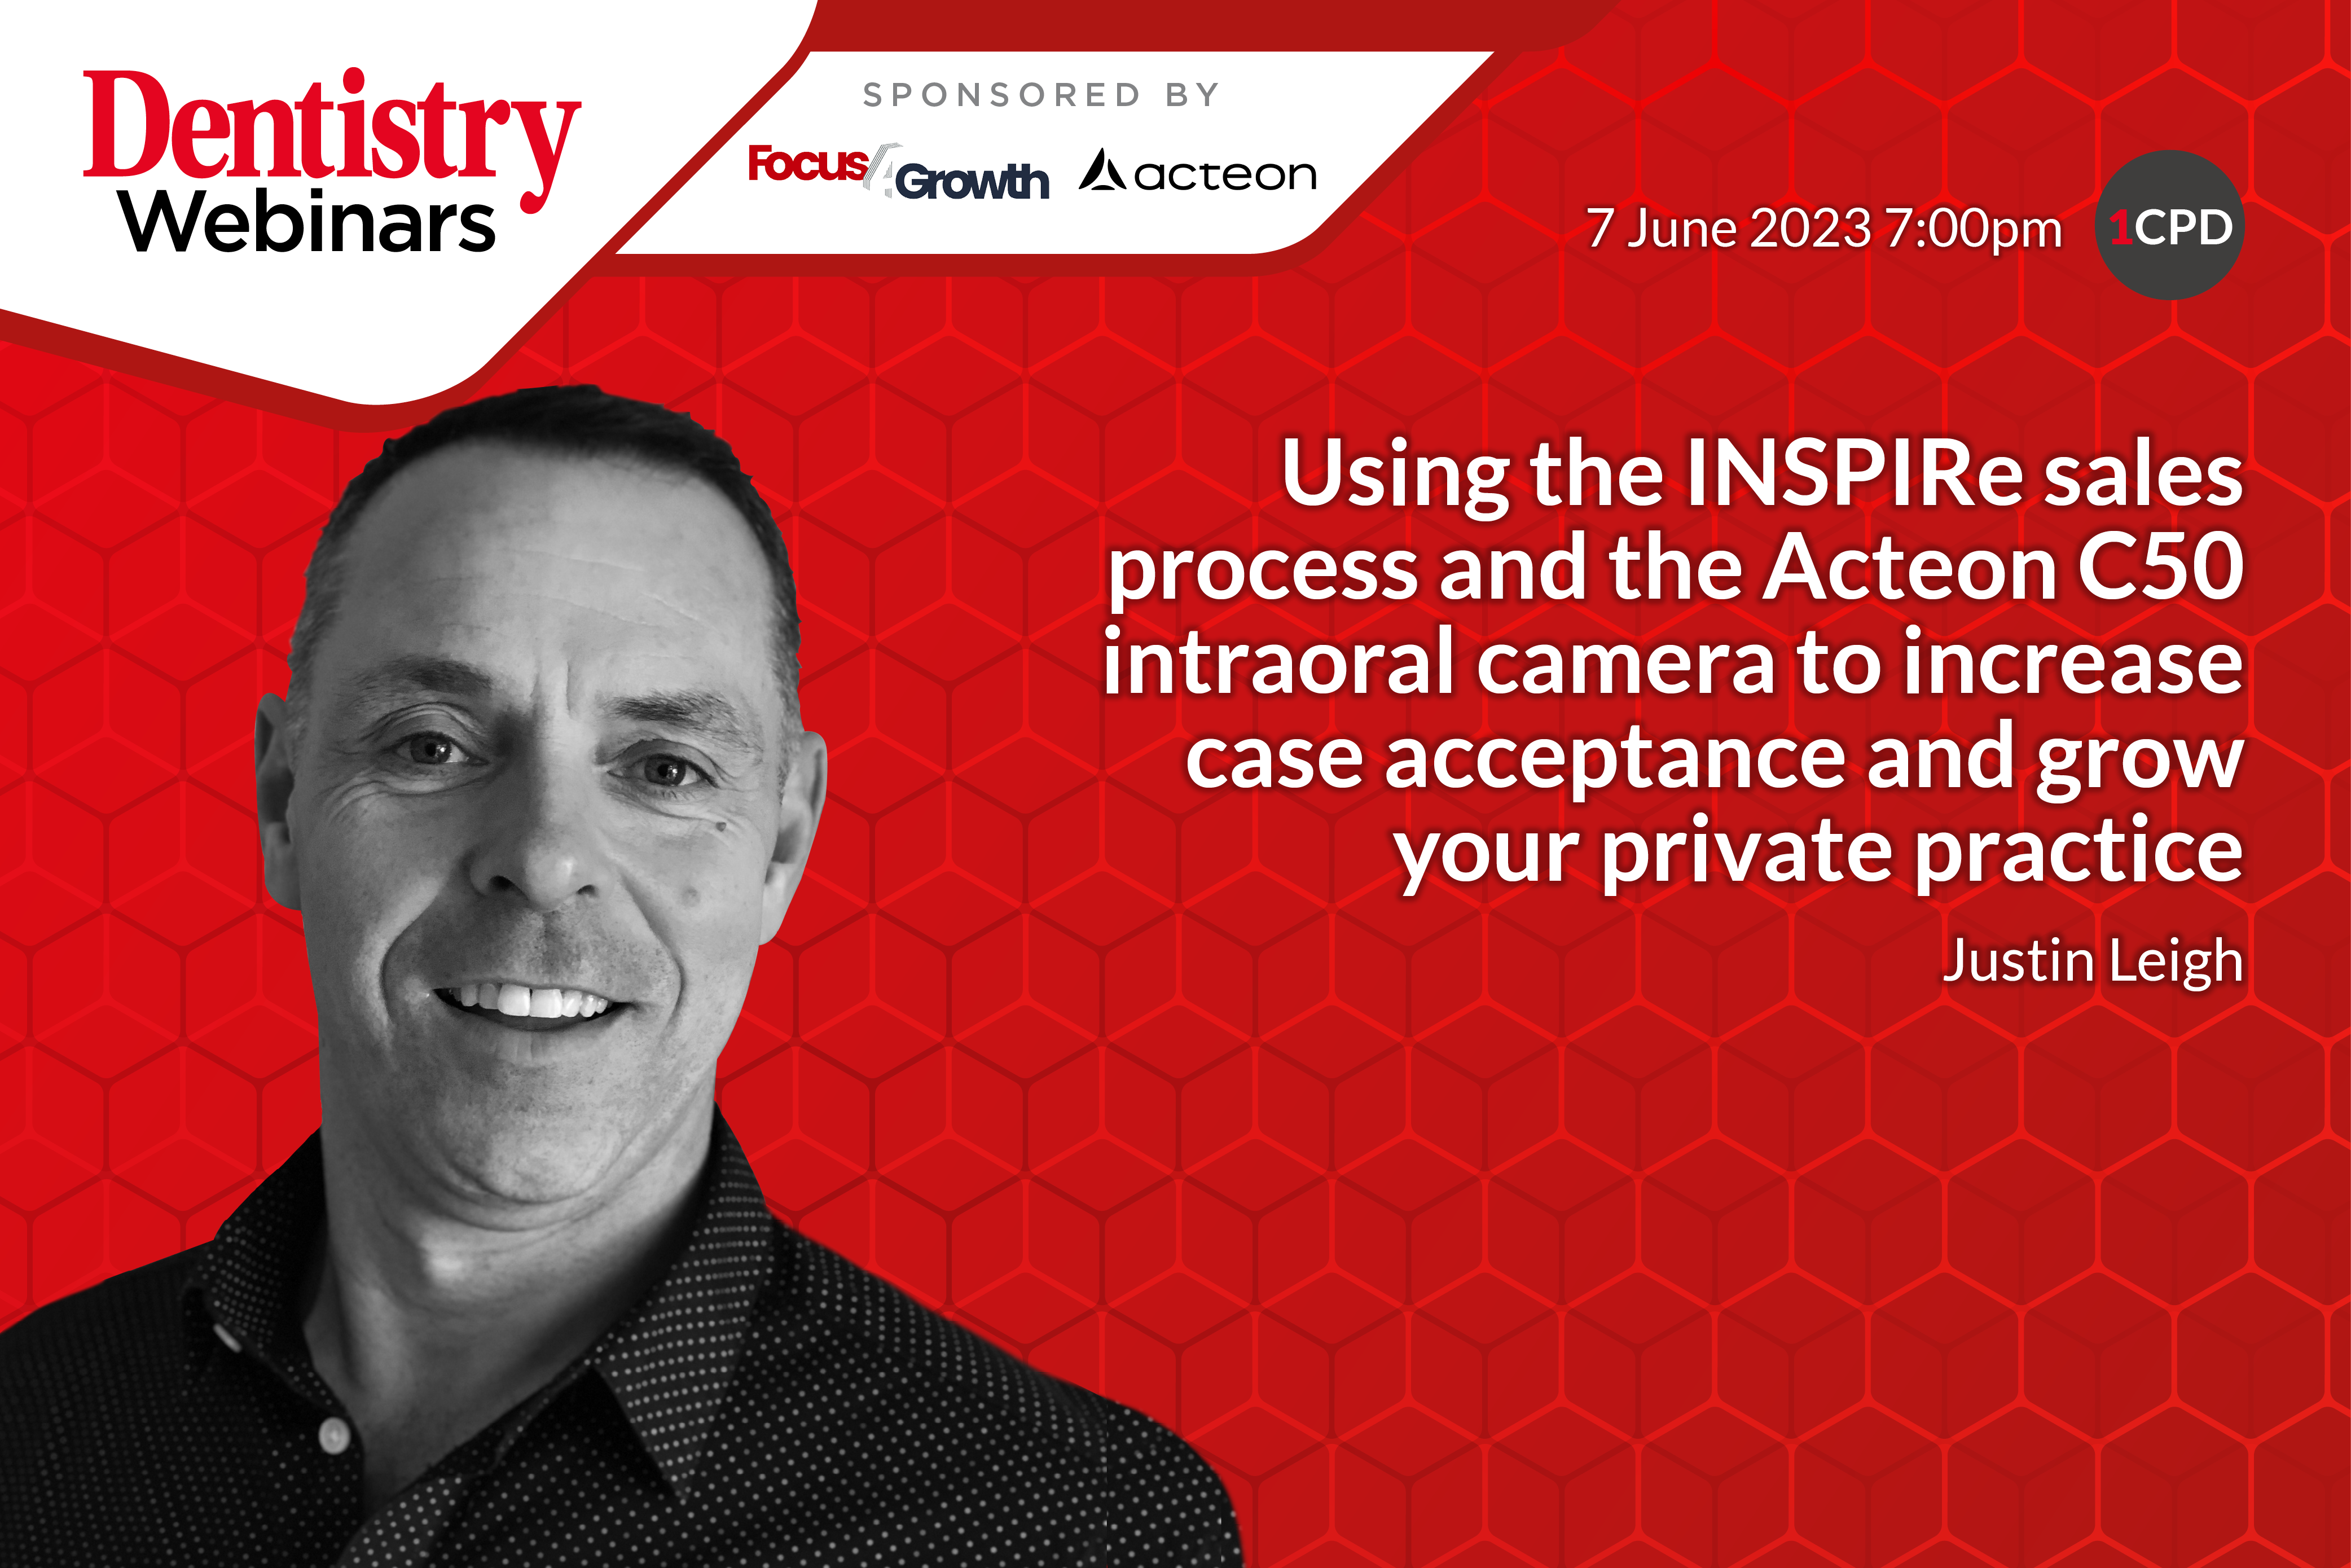 Join Justin Leigh on Wednesday 7 June as he discusses increasing case acceptance and growing your private practice using the INSPIRe sales process and the Acteon C50 intraoral camera.